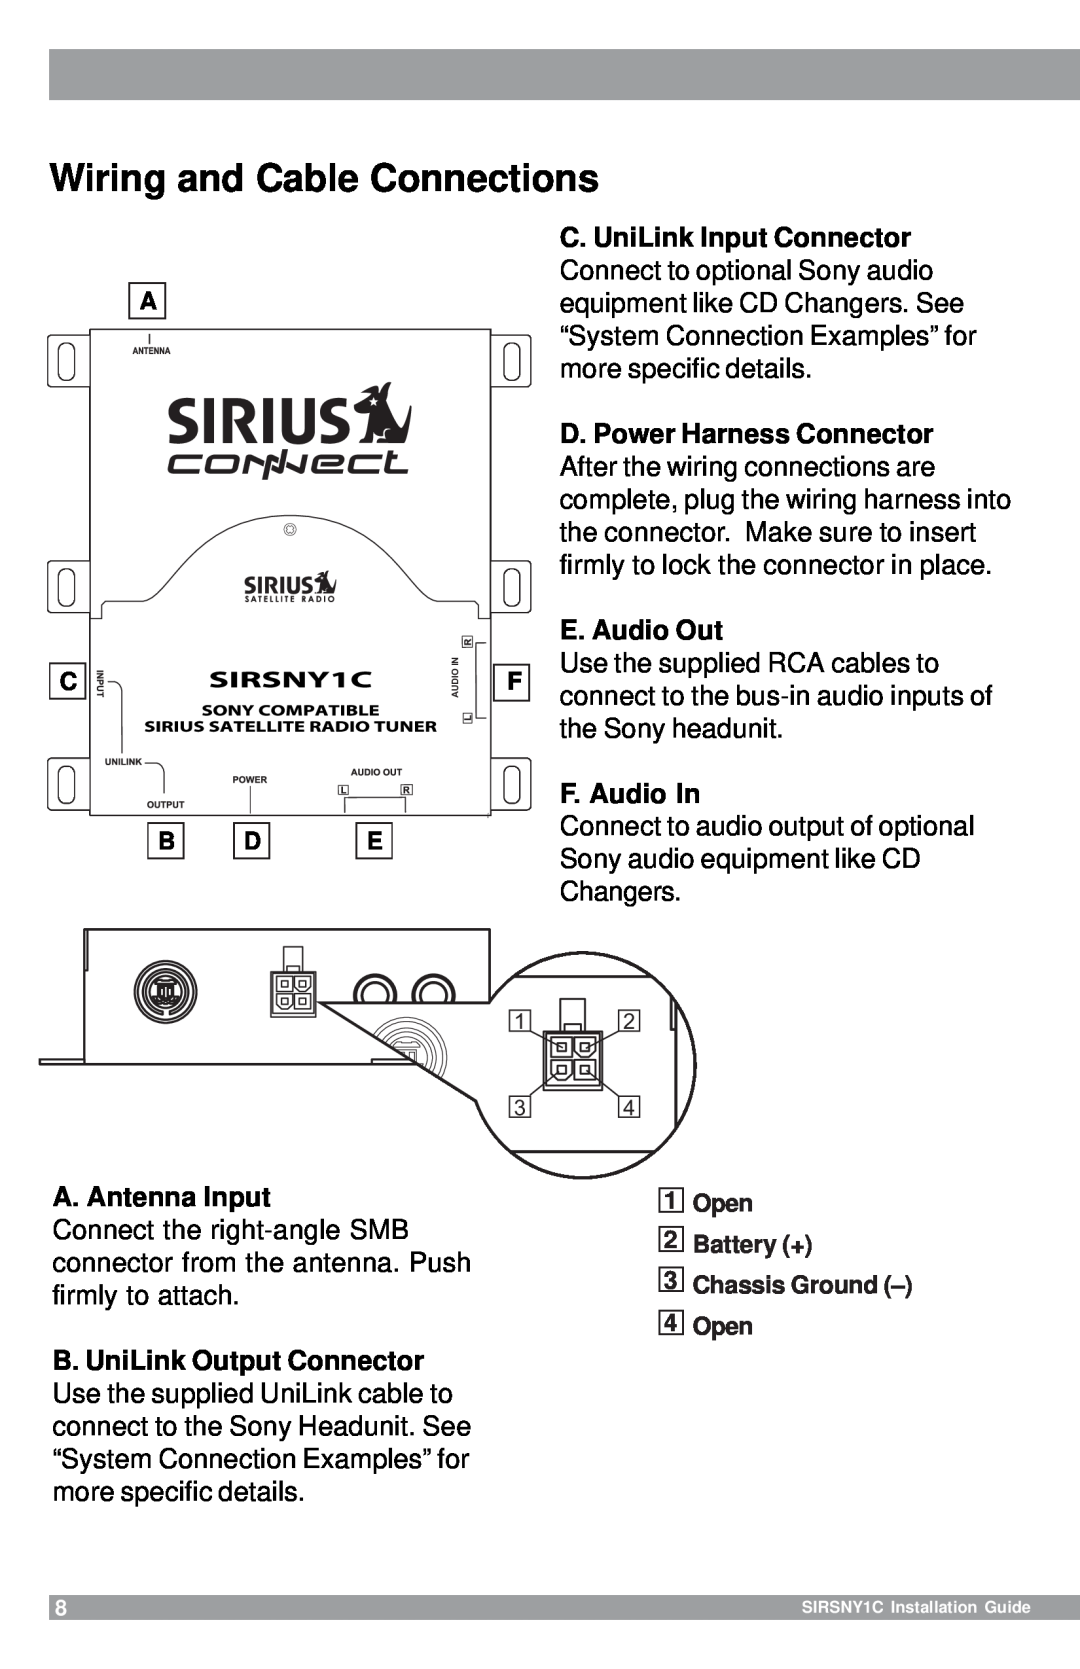 Sirius Satellite Radio SIRSNY1C manual Wiring and Cable Connections, E. Audio Out, F. Audio In, A. Antenna Input 